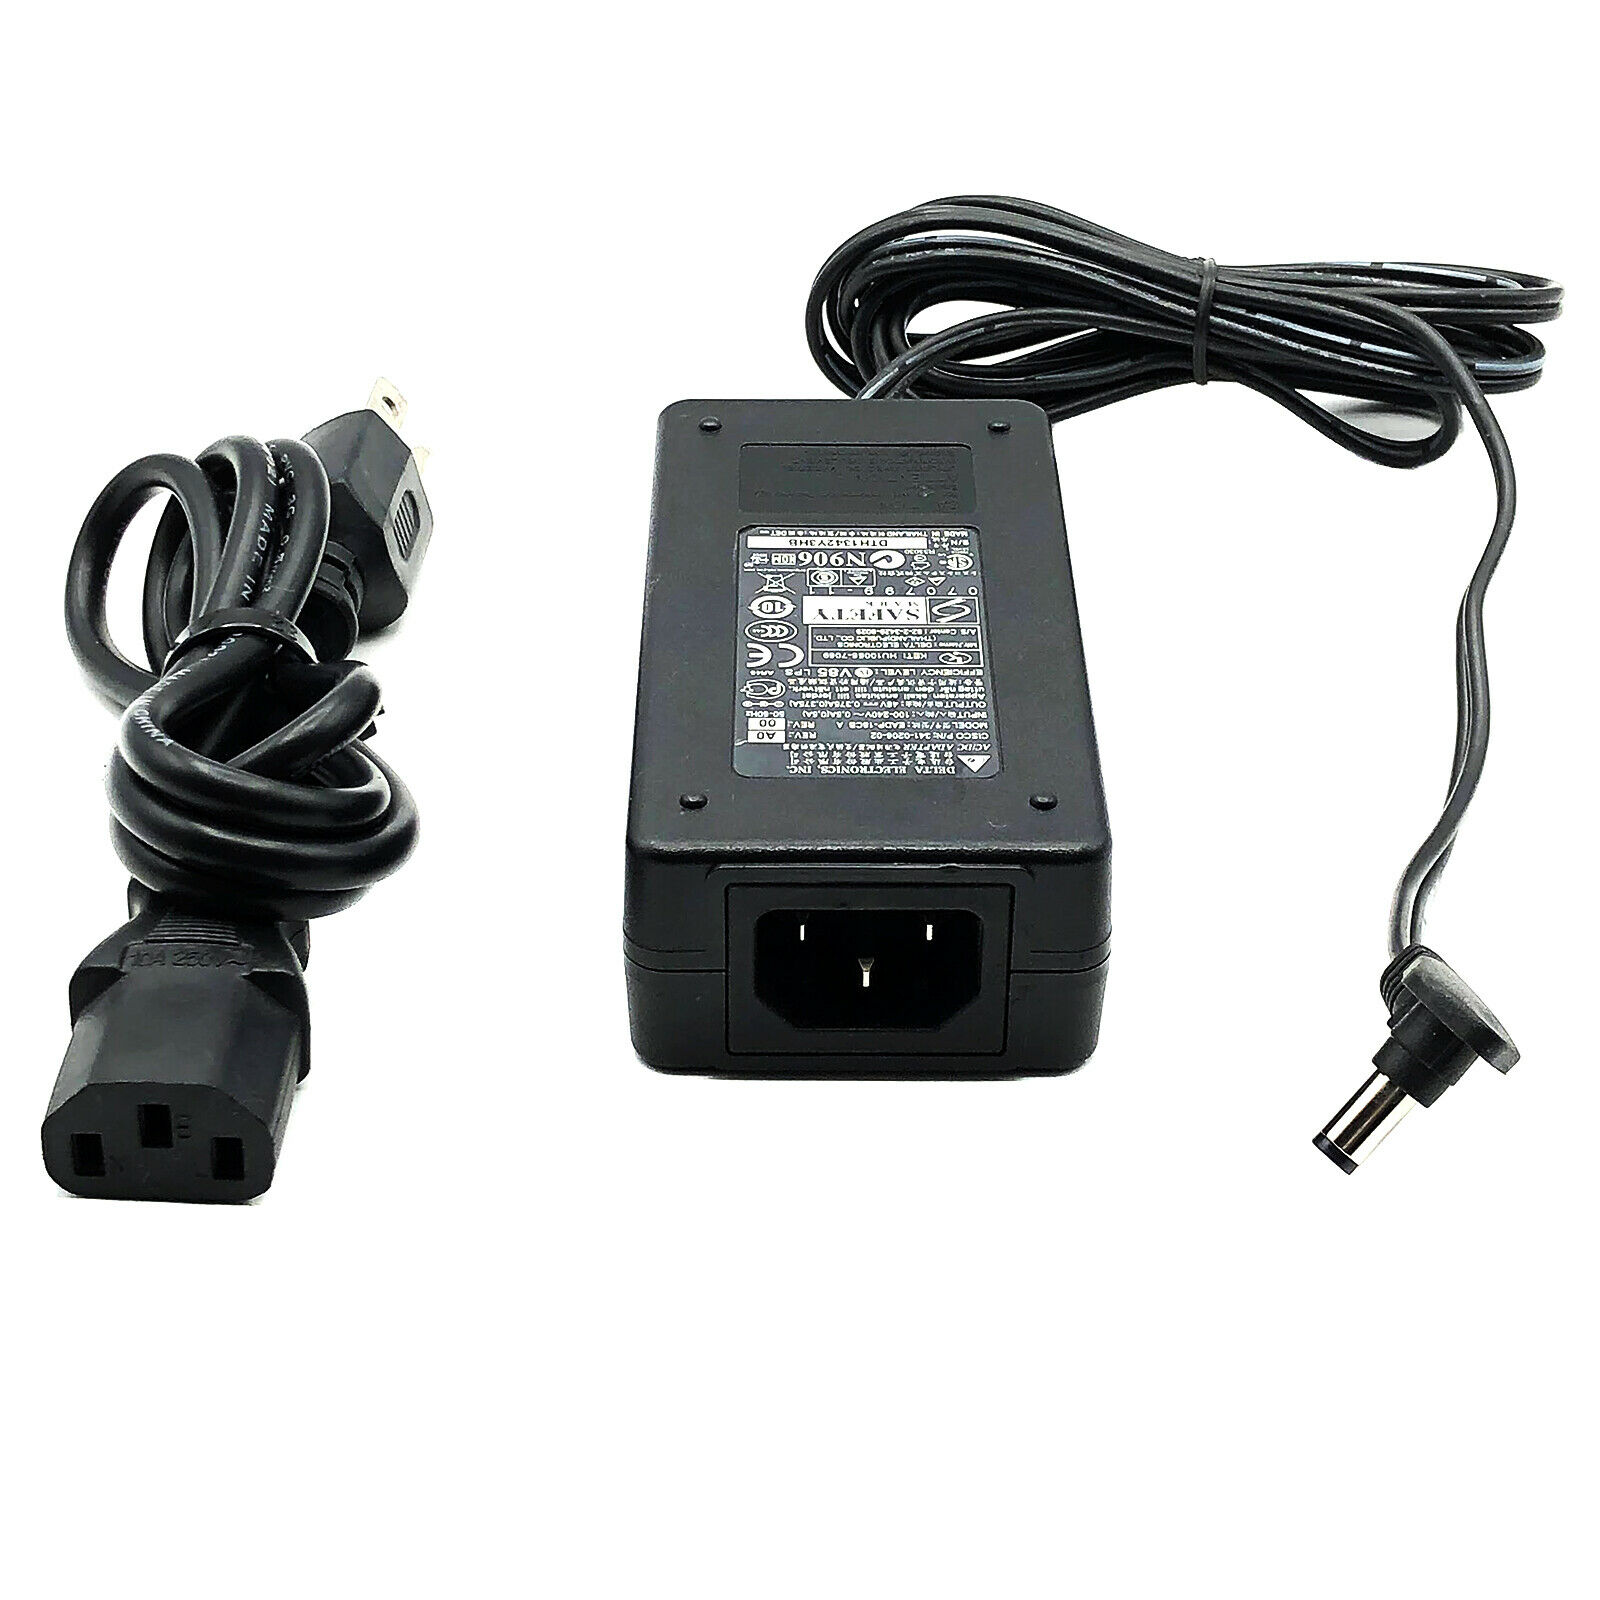 Genuine 48V Delta AC Adapter For Cisco 7900 IP Phone Series Power Supply w/PC Compatible Brand: For Cisco Connection S